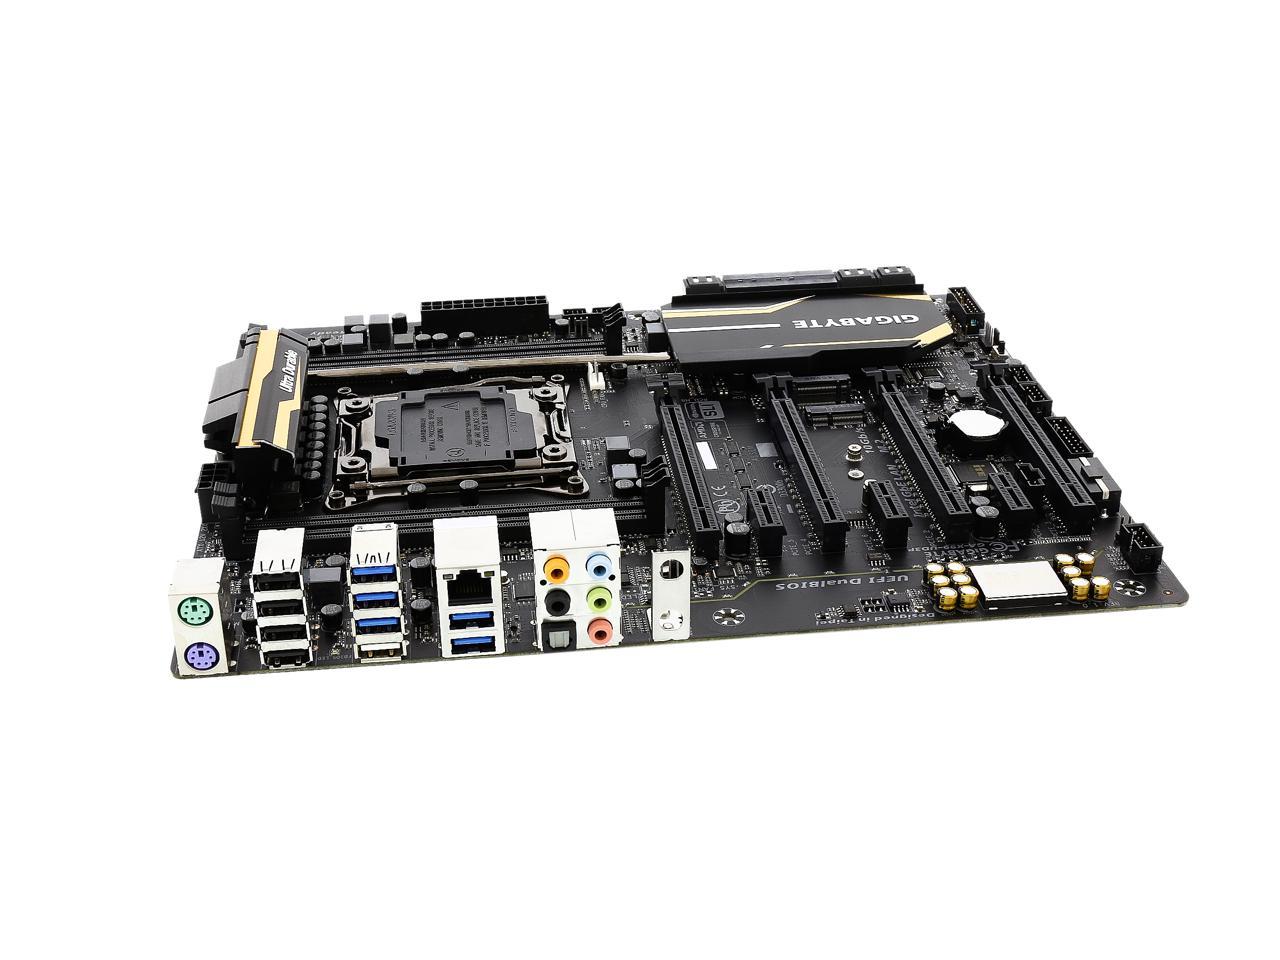 PARTS-QUICK Brand 4GB Memory for Gigabyte GA-X99-UD3P Motherboard DDR4 PC4-17000 2133 MHz Non-ECC DIMM